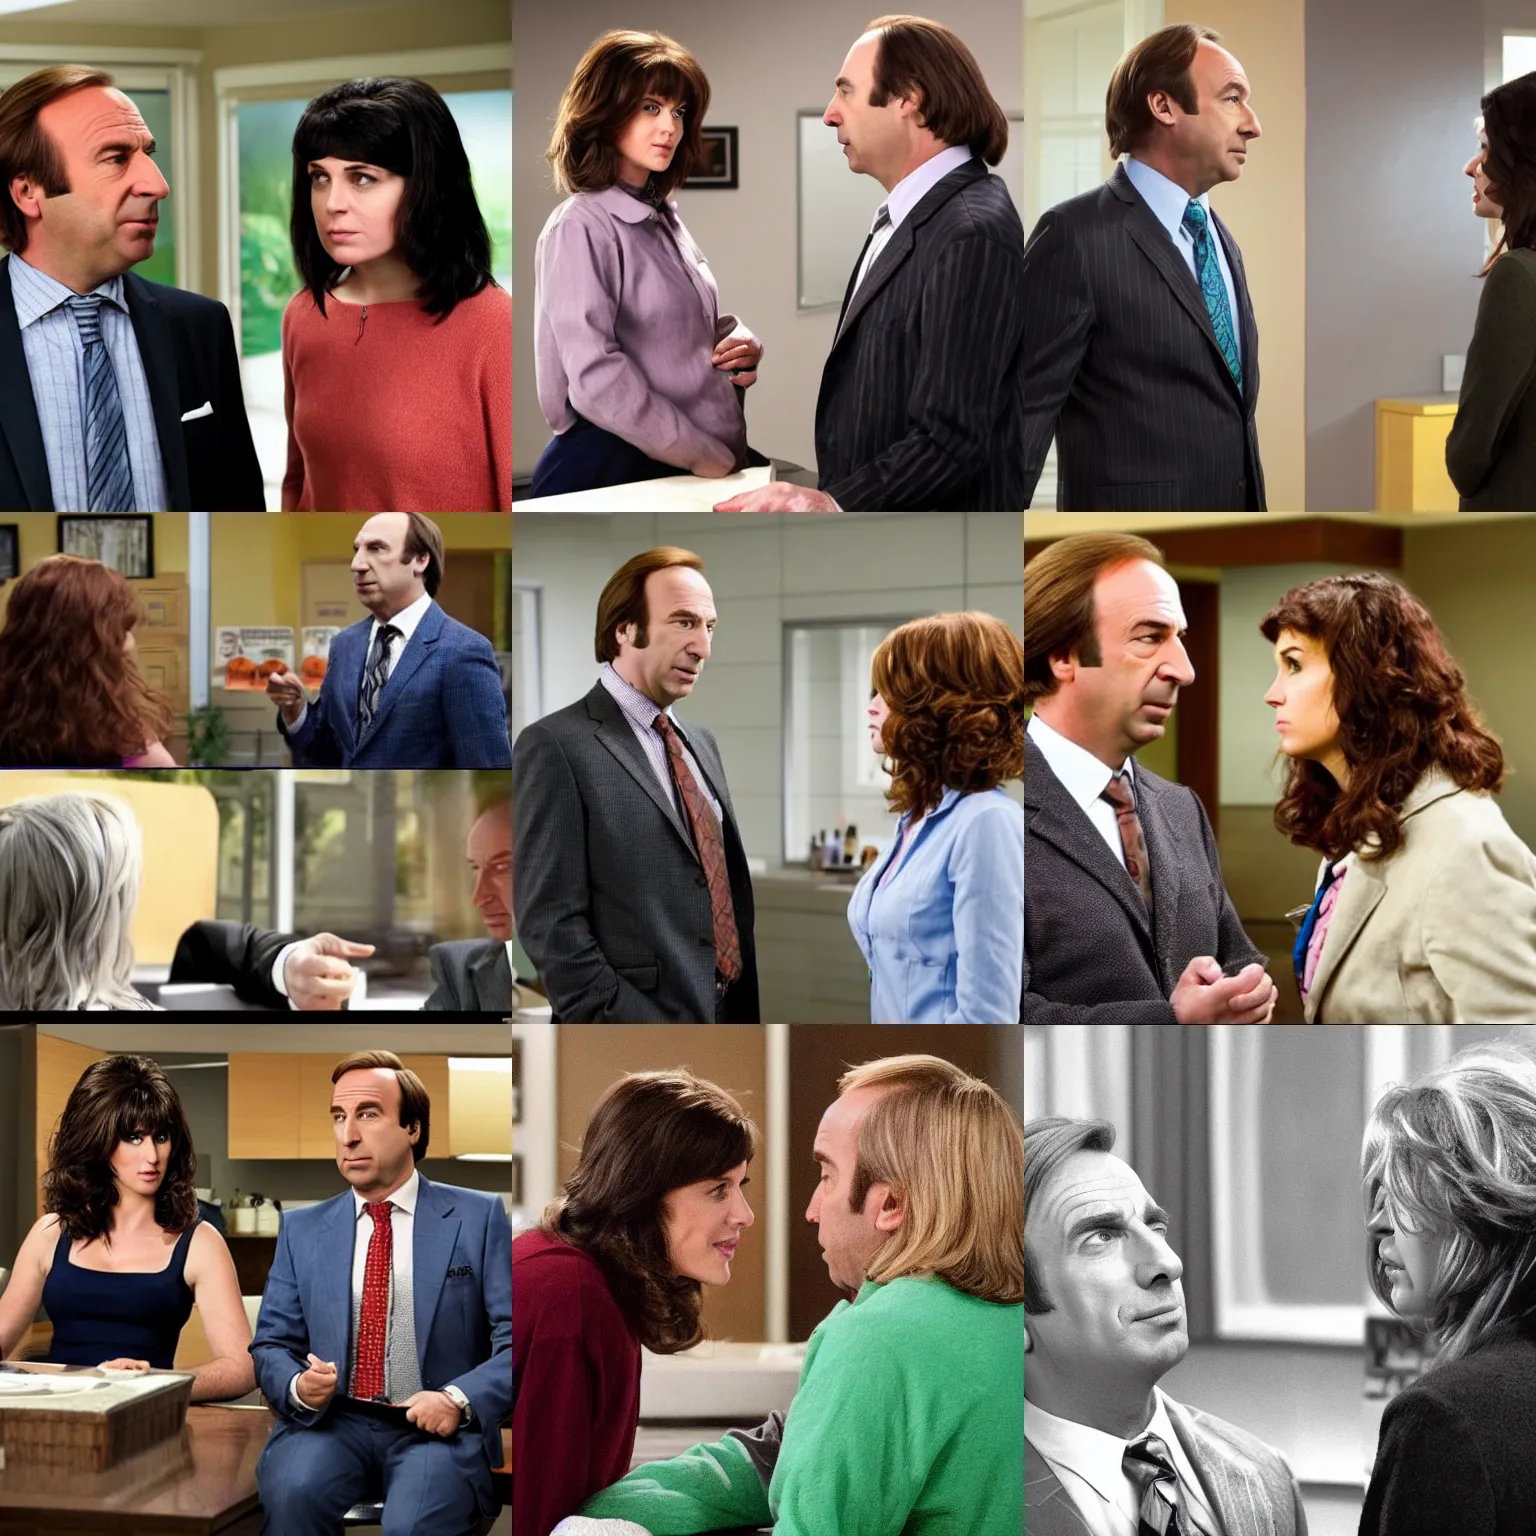 Prompt: saul goodman as jimmy megal meets a woman with medium length hair